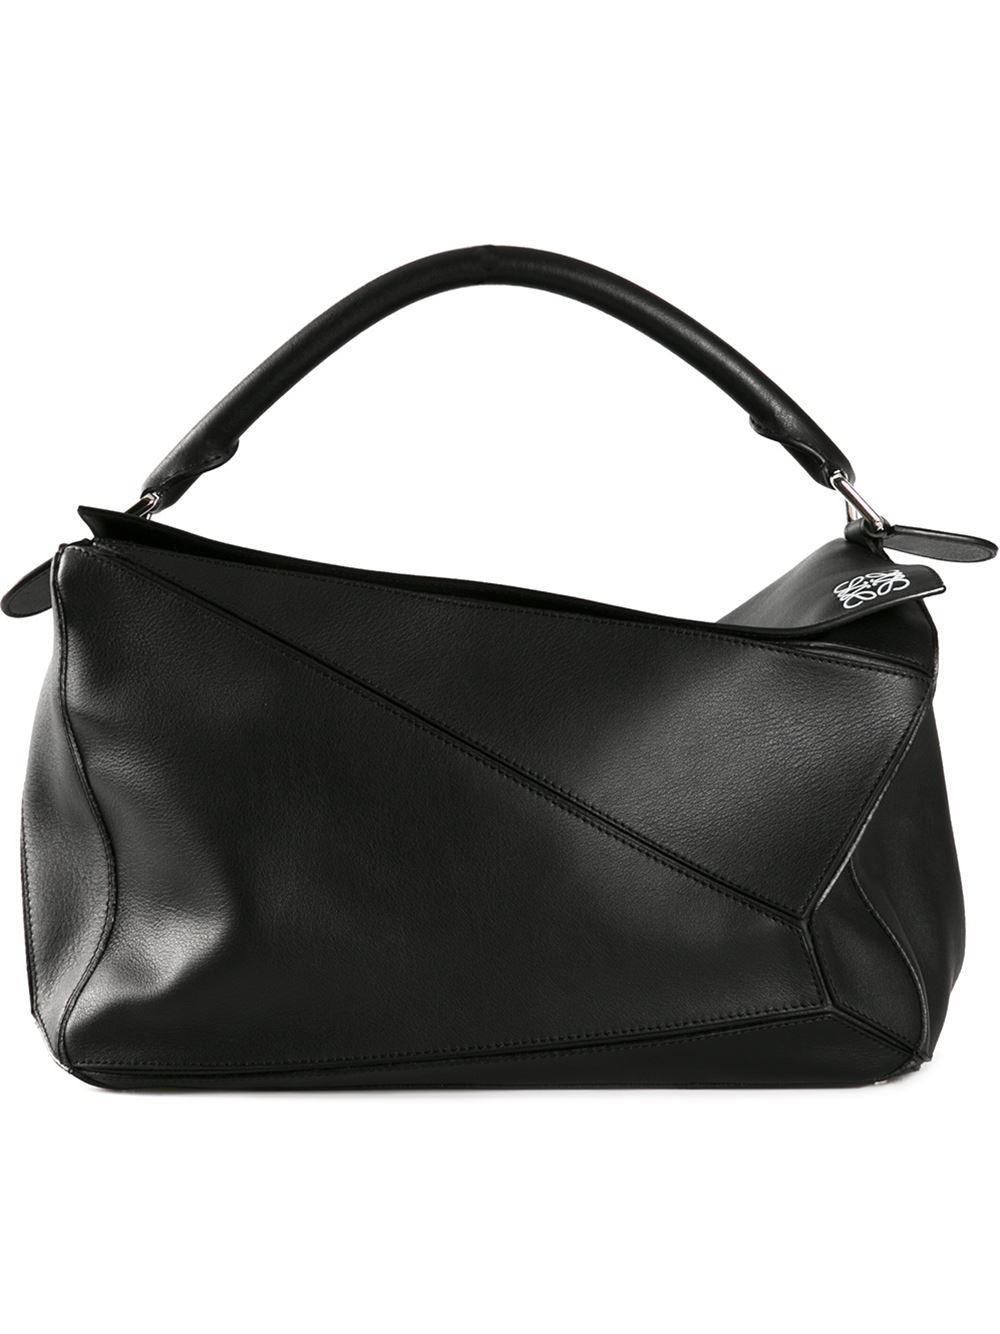 Loewe Leather Large 'puzzle' Bag in Black - Lyst